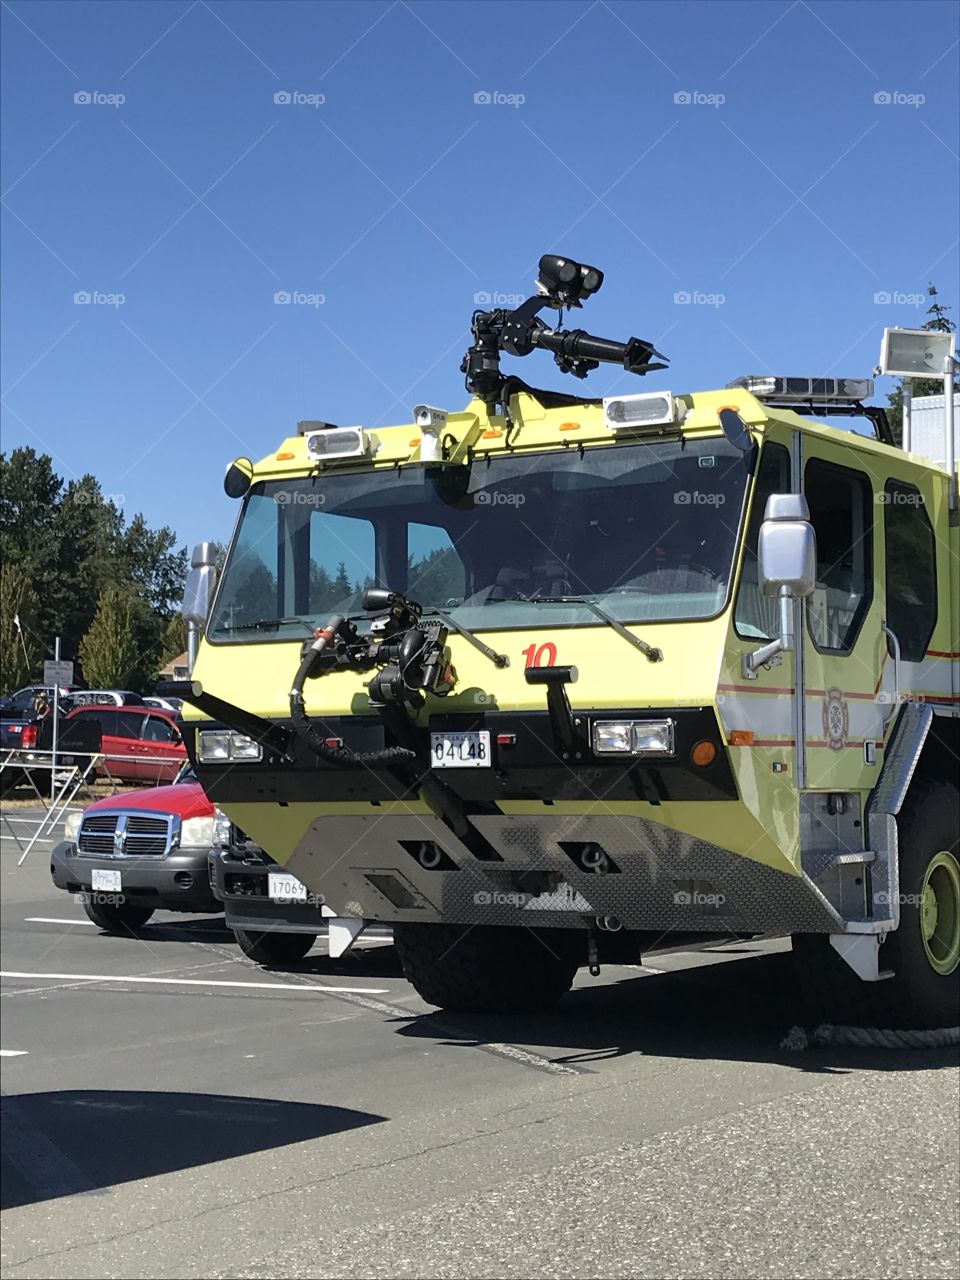 One of the Canadian military fire trucks that is equipped to respond to flightline emergencies